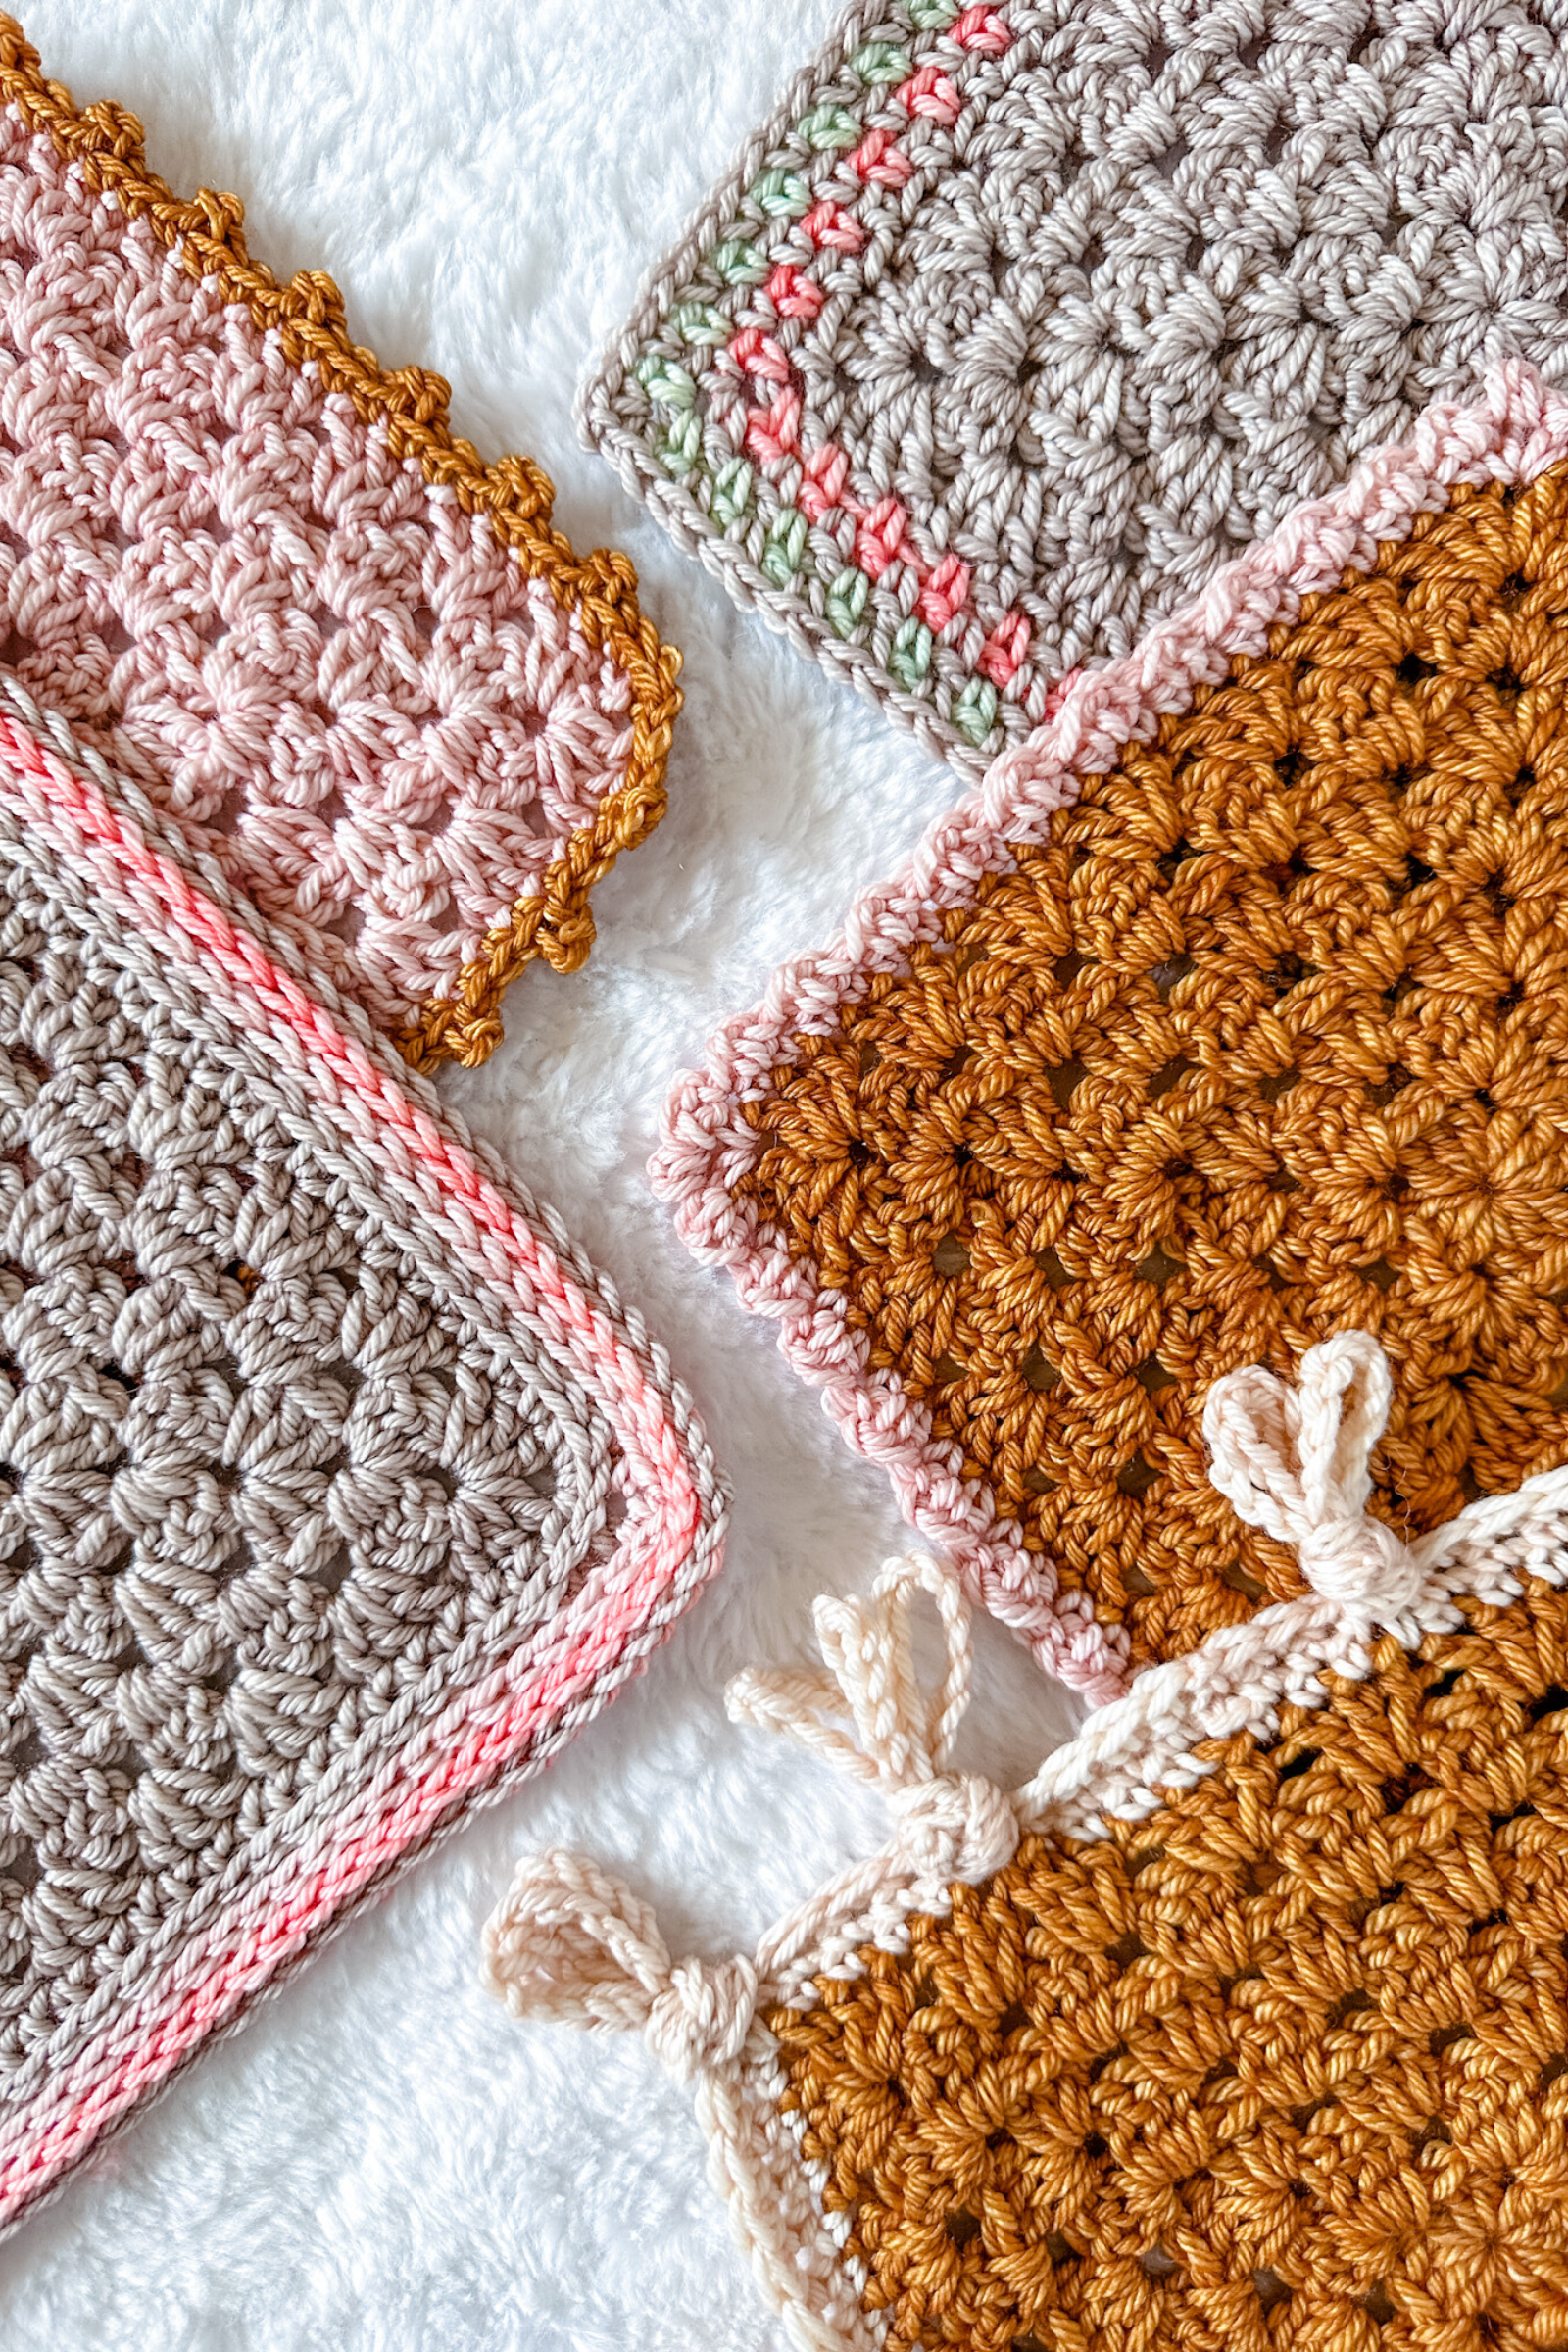 5 Quick & Easy Crochet Border Stitch Patterns for Beginners - TL